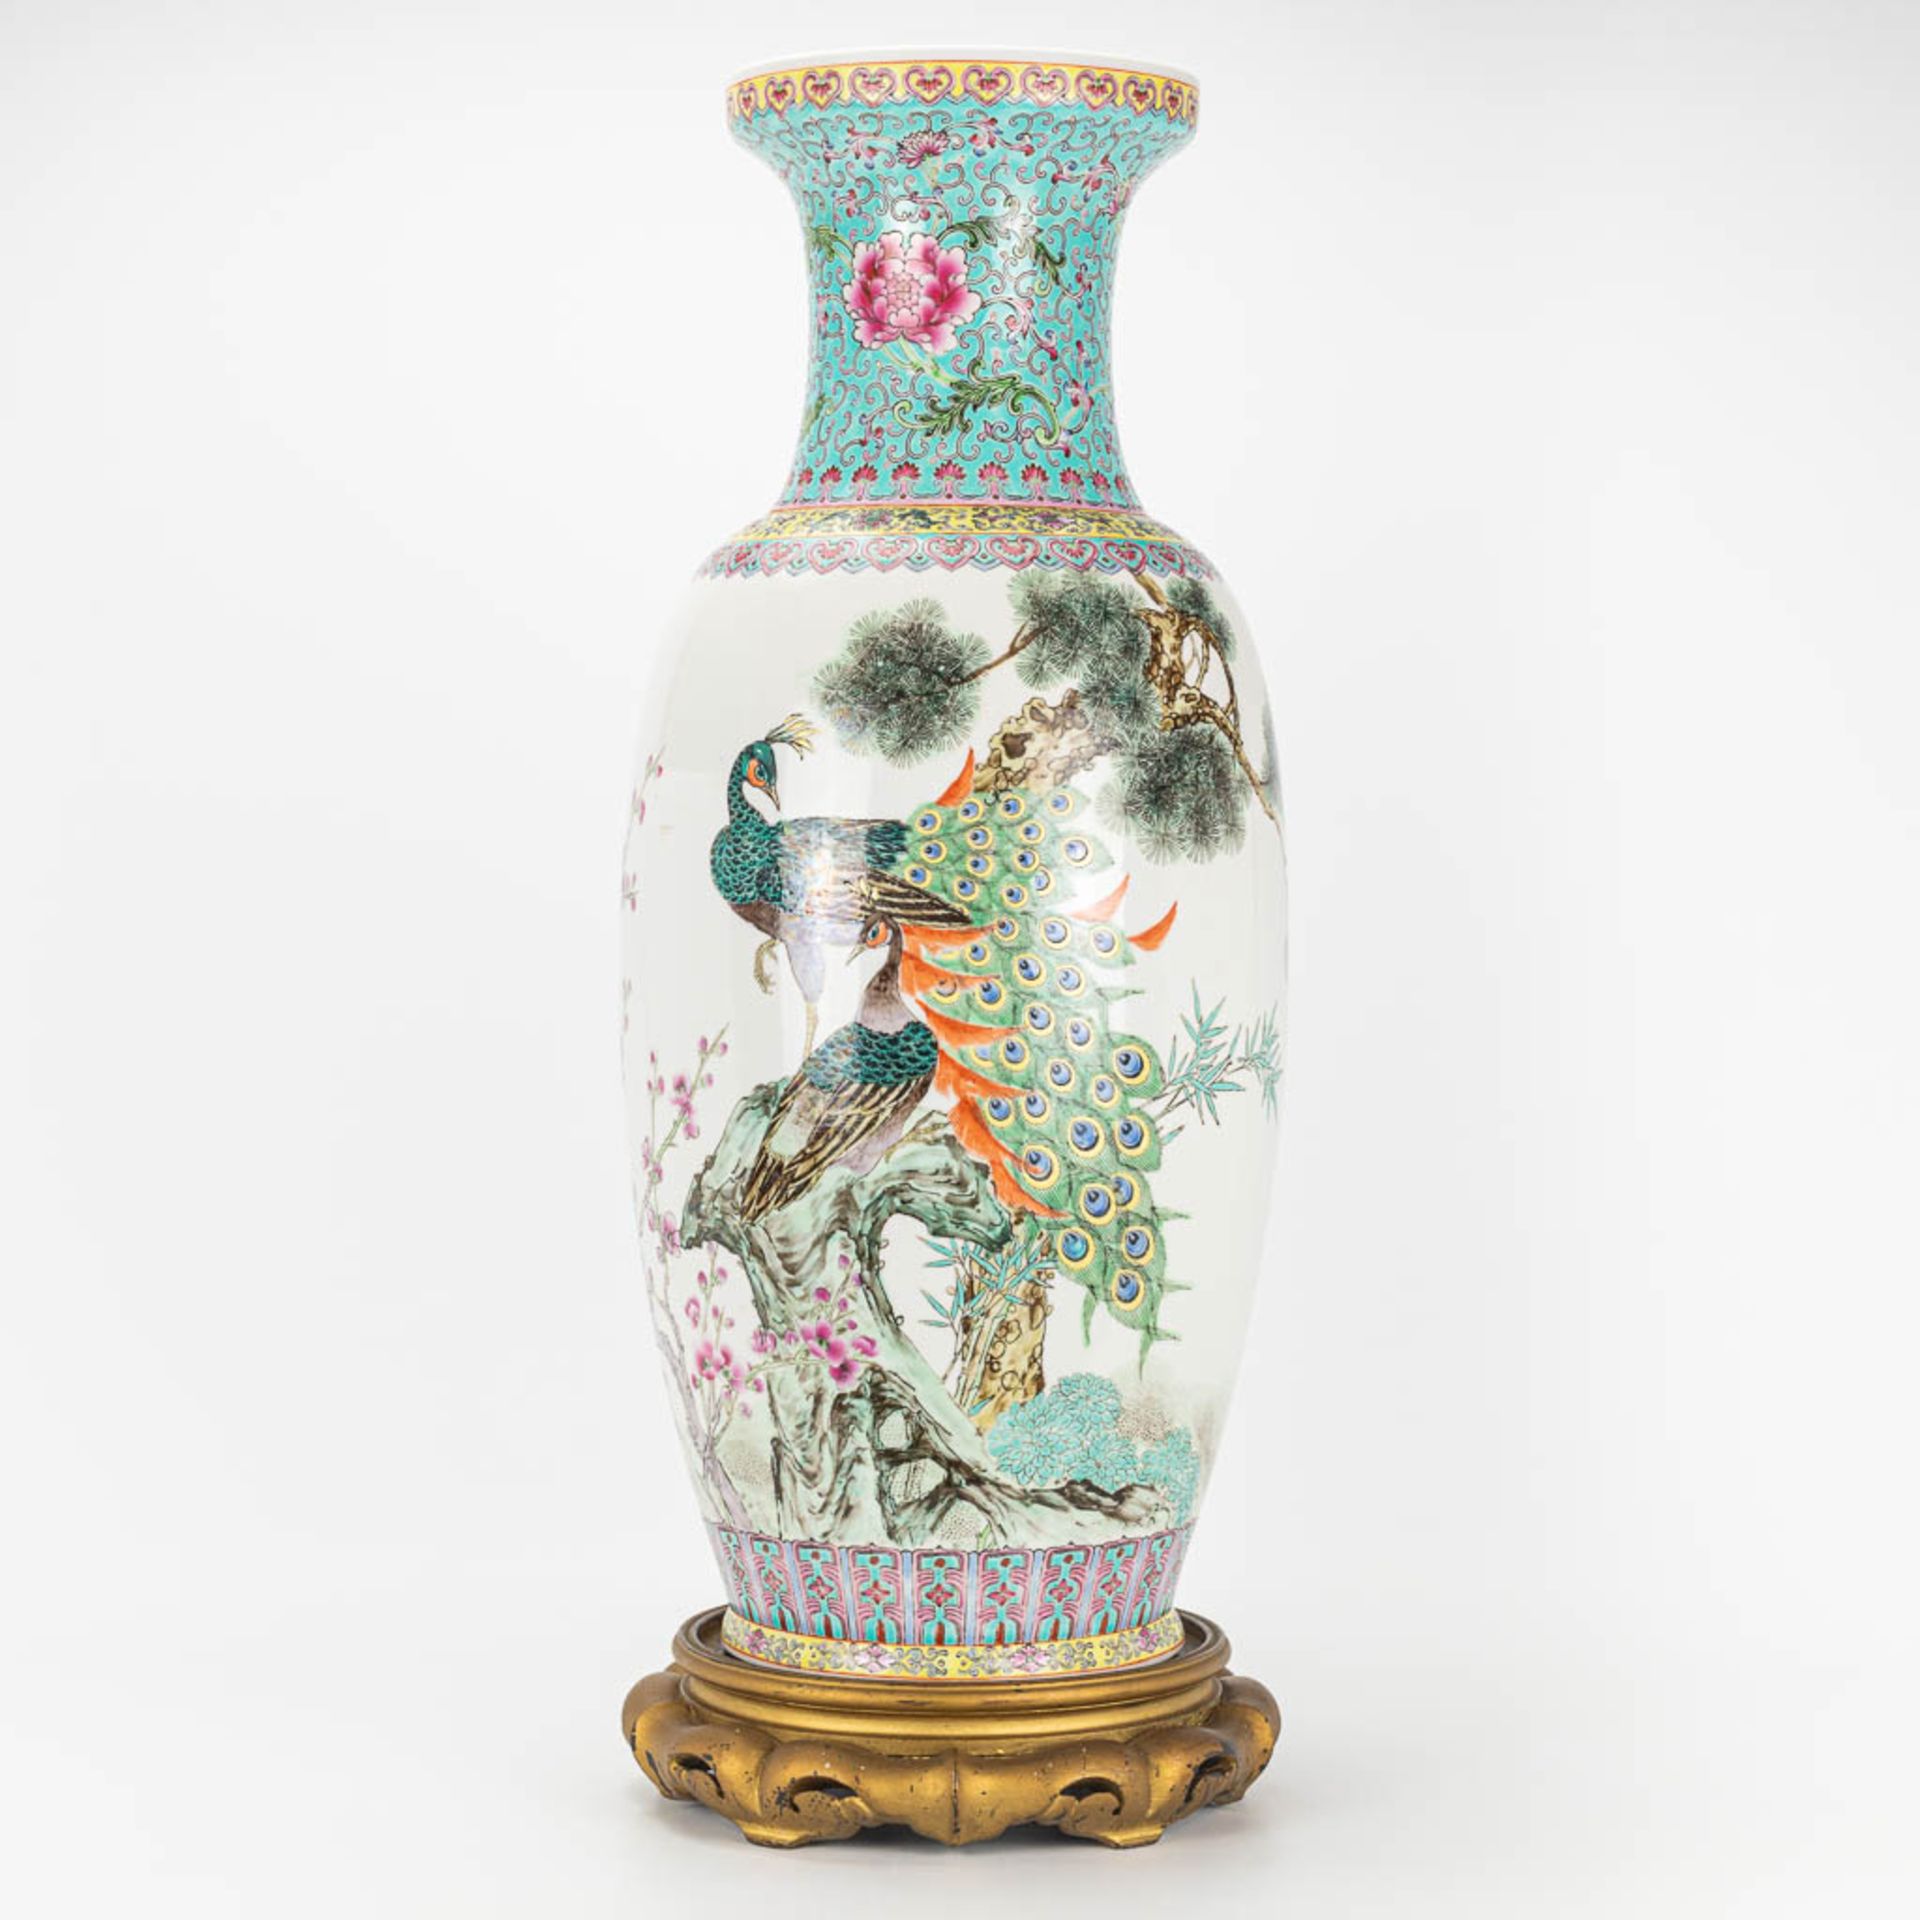 A vase made of Chinese porcelain and decorated with peacocks